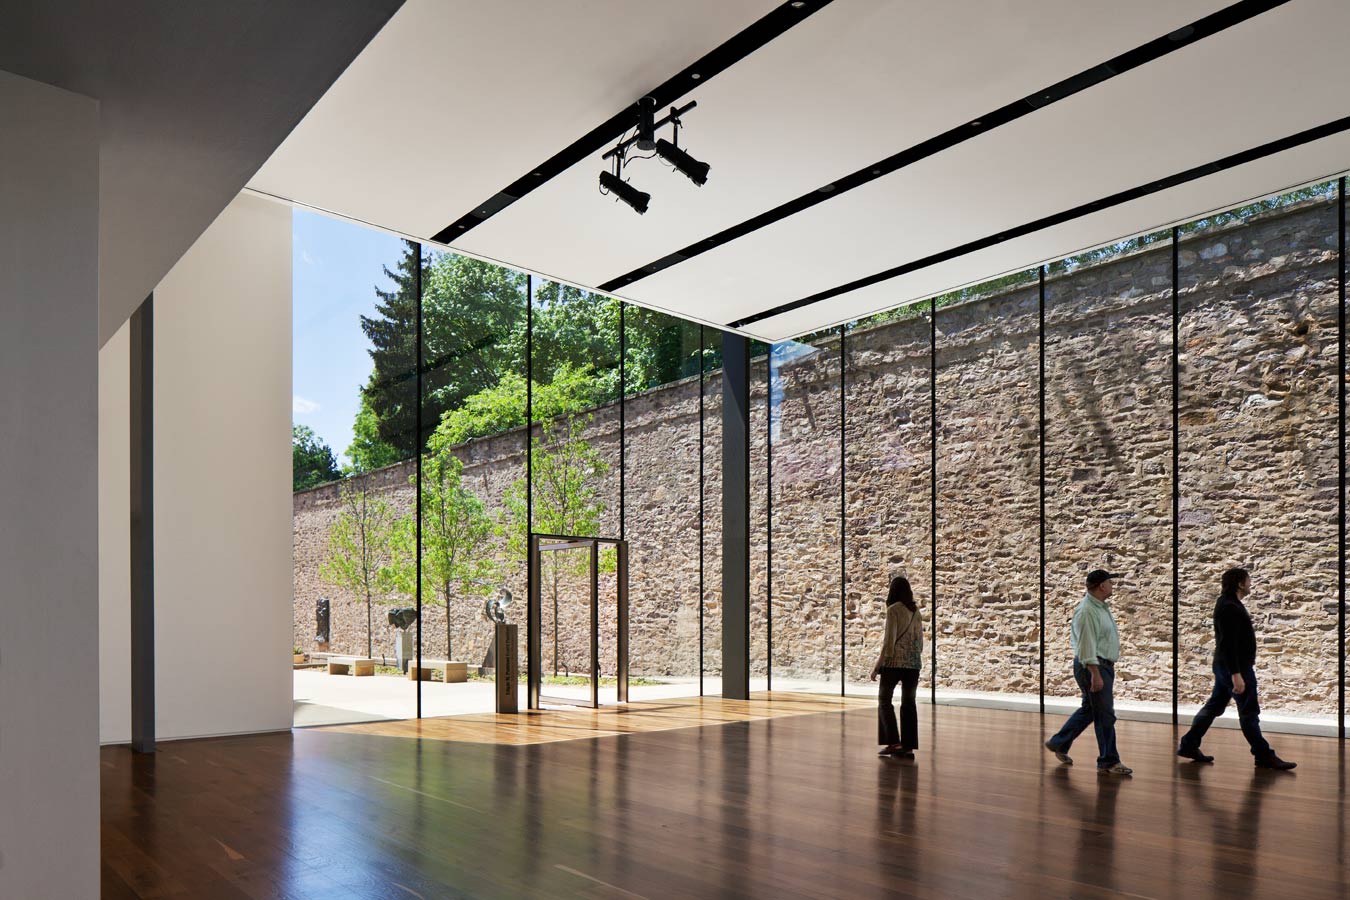 <p>A range of programs and events, including lectures, performances, and private parties, can be accommodated by the new pavilion, which adds an additional revenue stream for the museum. <br><small>&copy; Michael Moran/OTTO</small> </p>